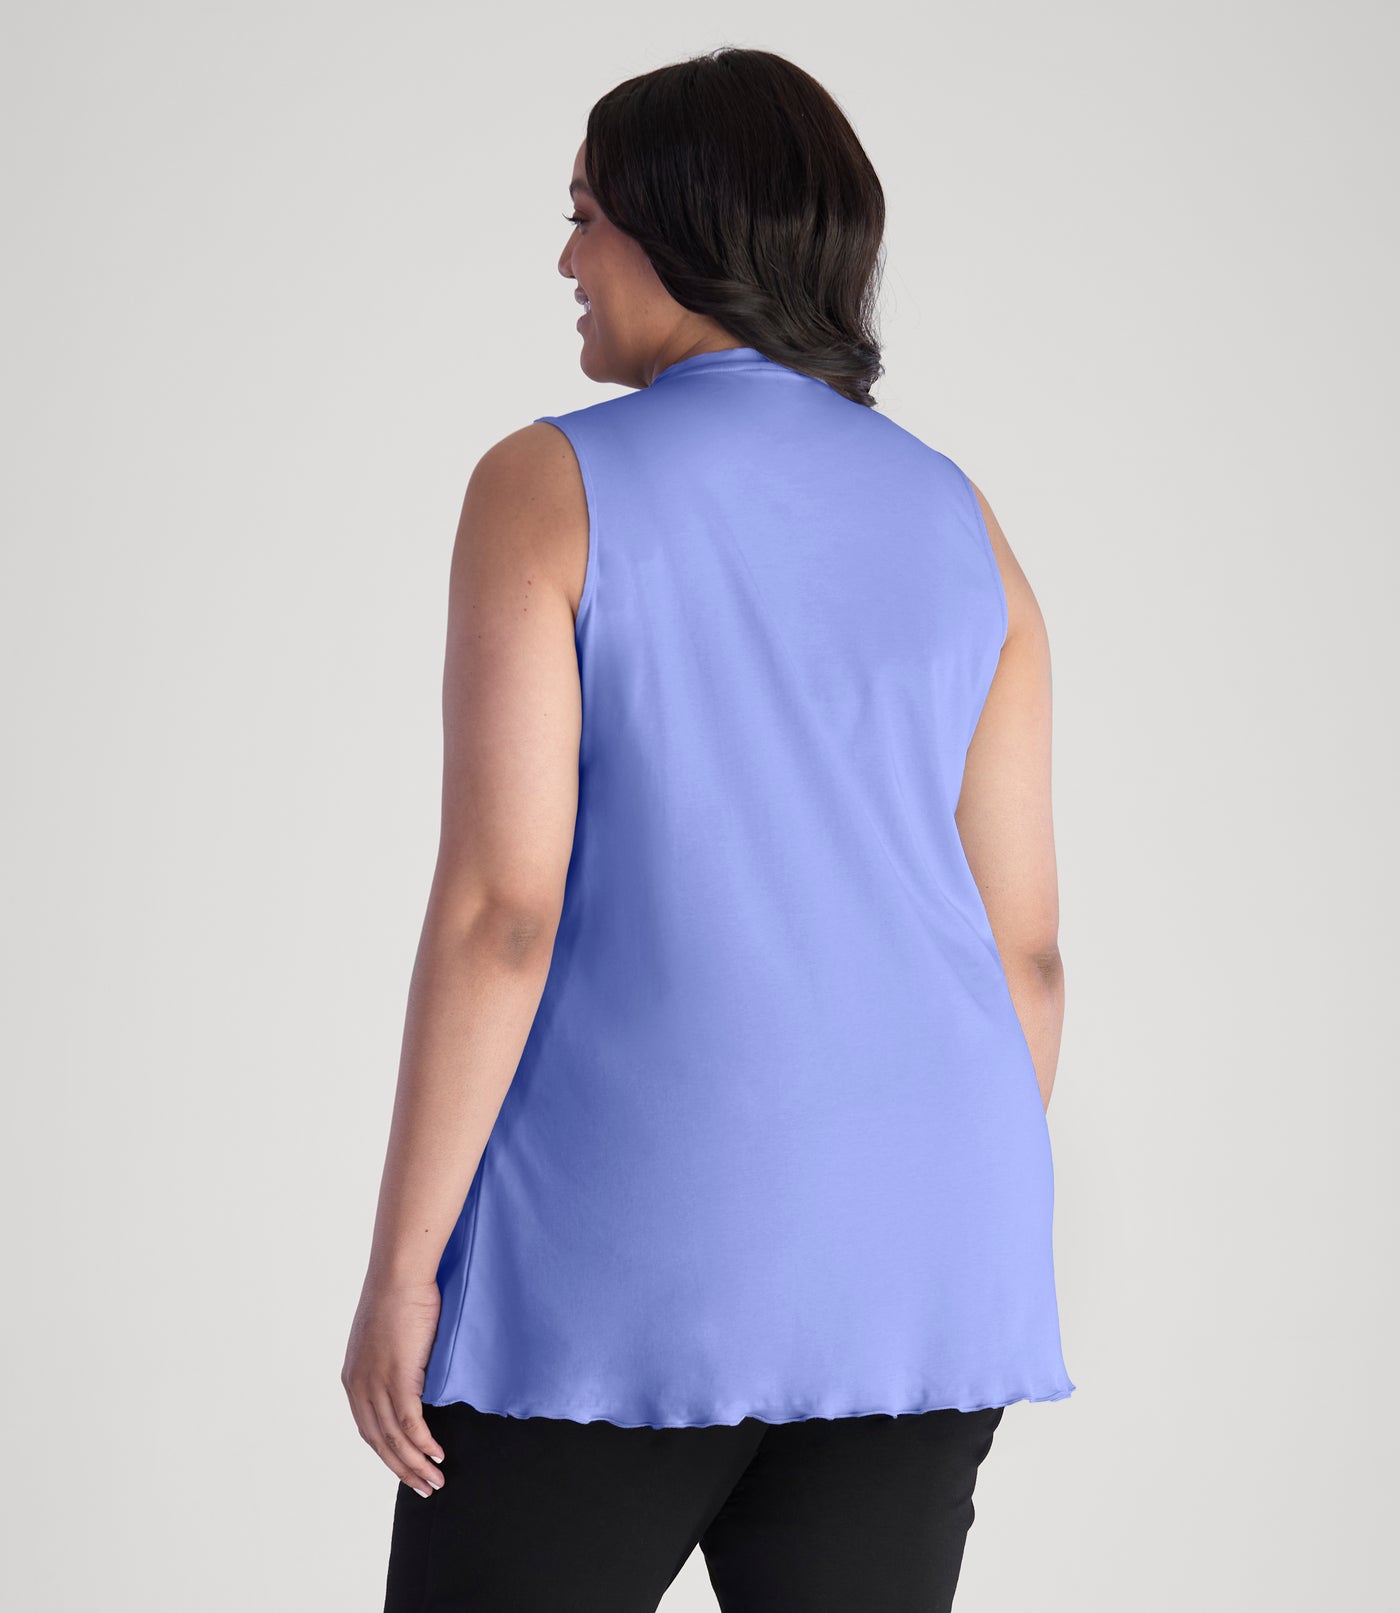 Model, facing back, wearing JunoActive's Cotton Chic Let's Trim Sleeveless plus size top in color periwinkle.